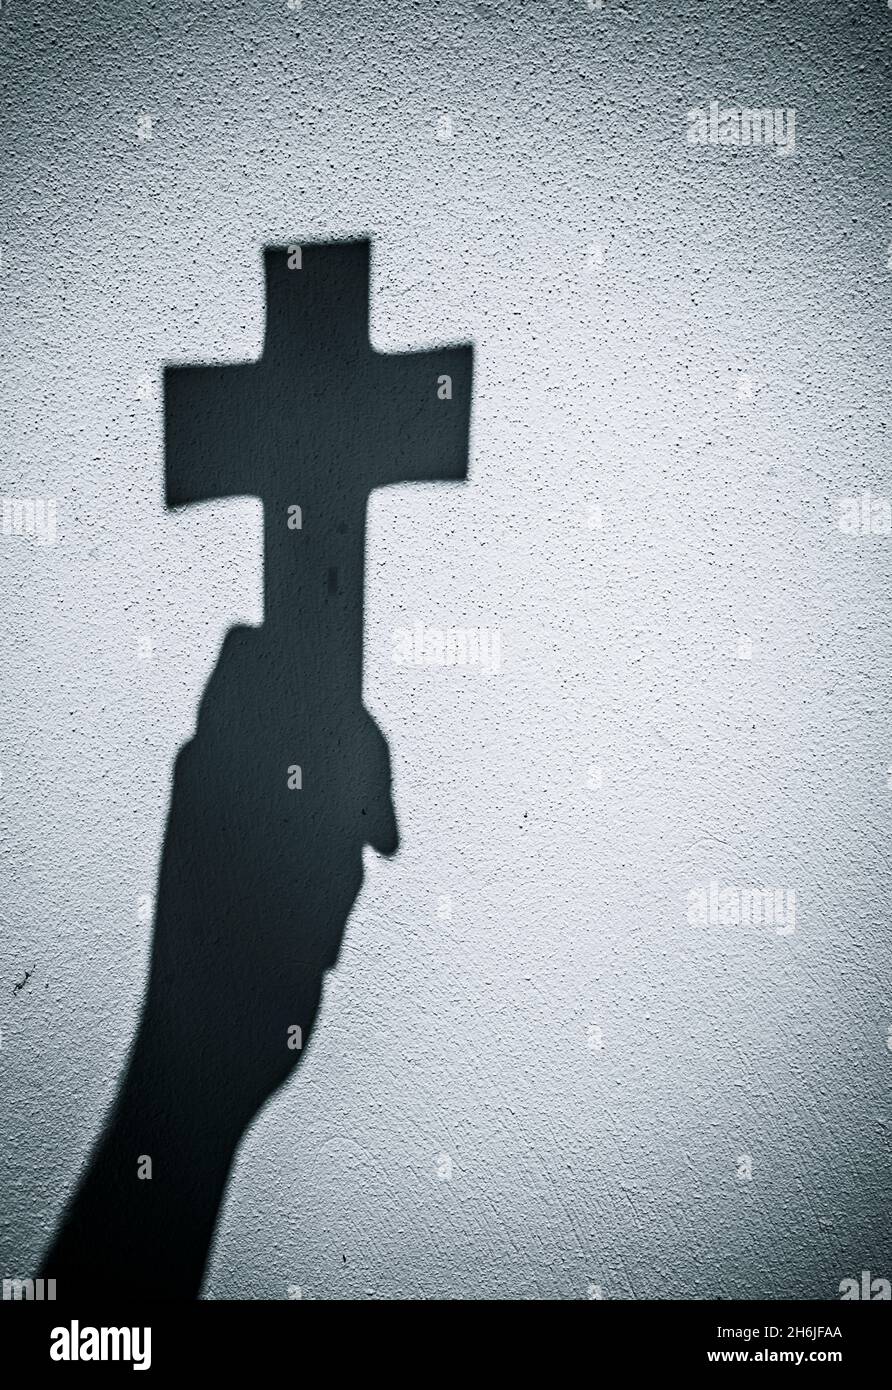 Silhouette of hand holding up crucifix Stock Photo